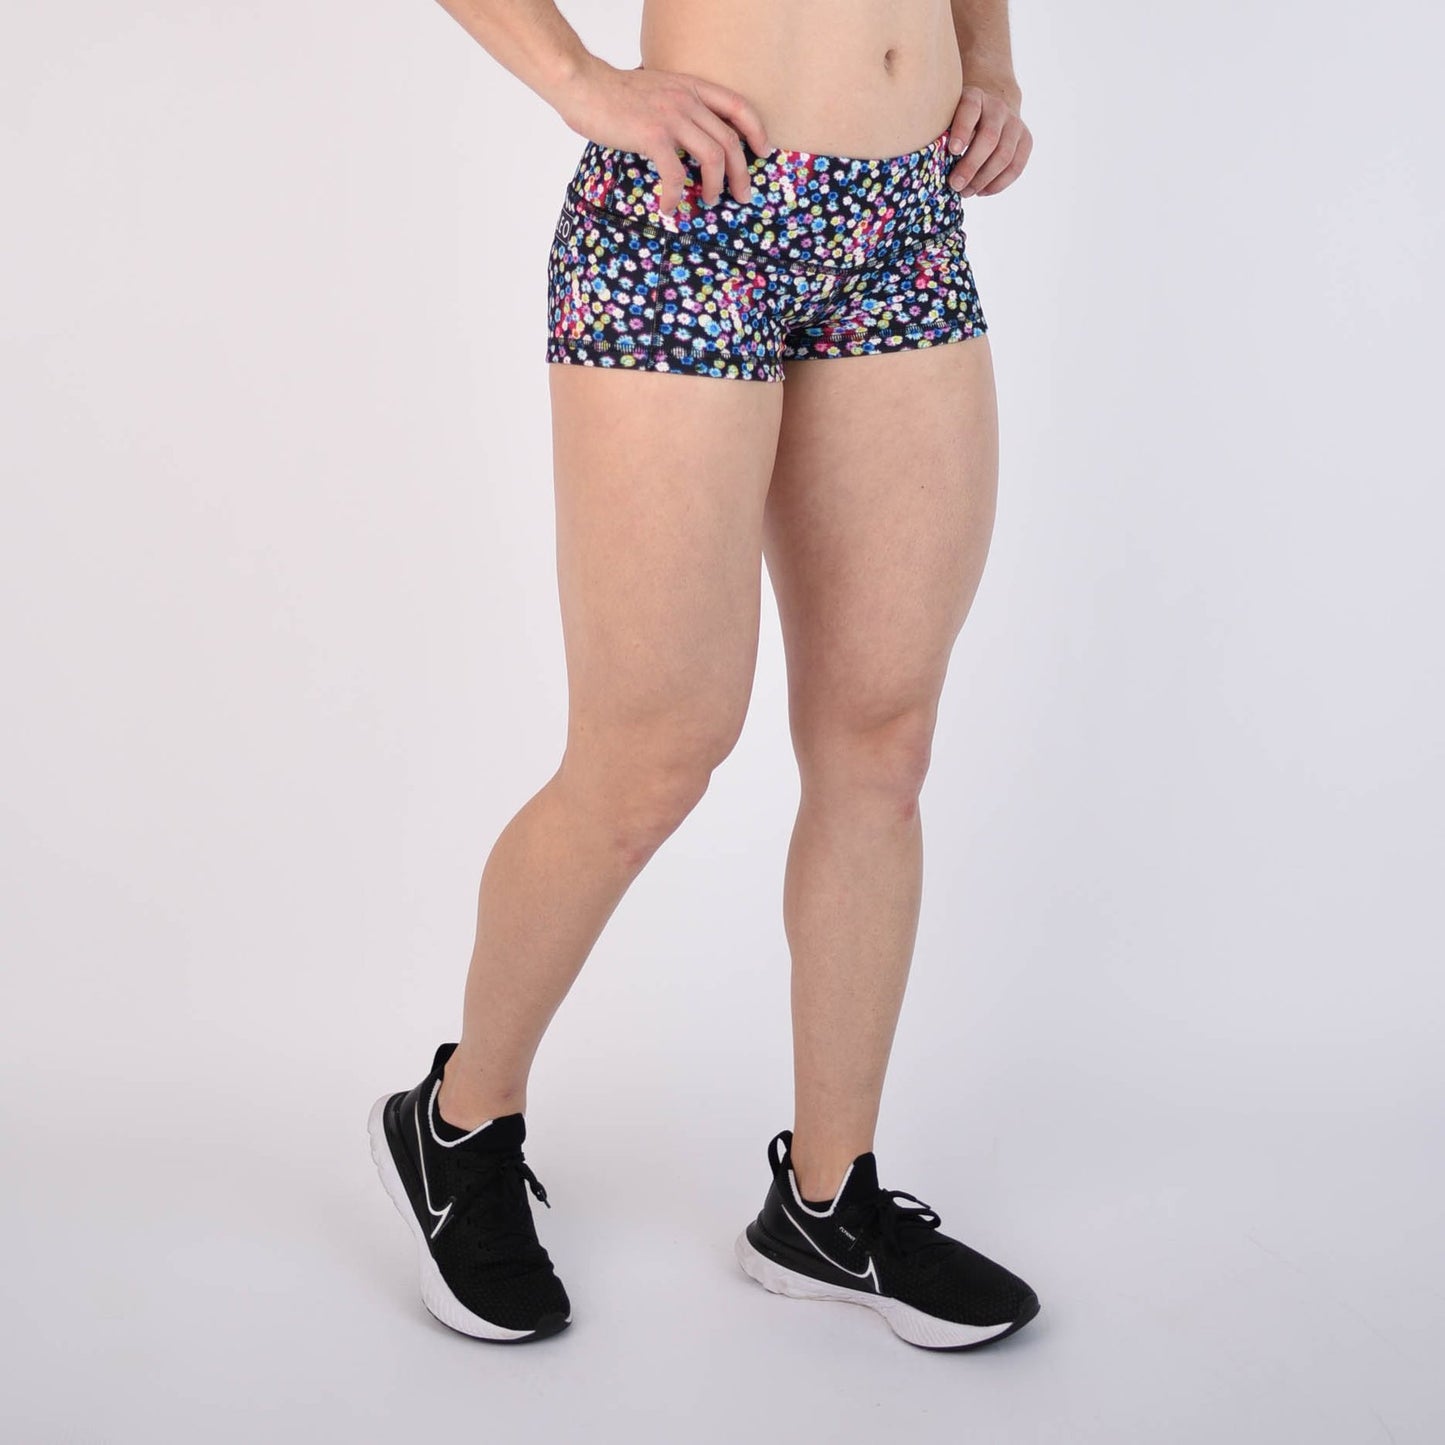 FLEO Headlights Shorts (Low-rise Contour) - 9 for 9